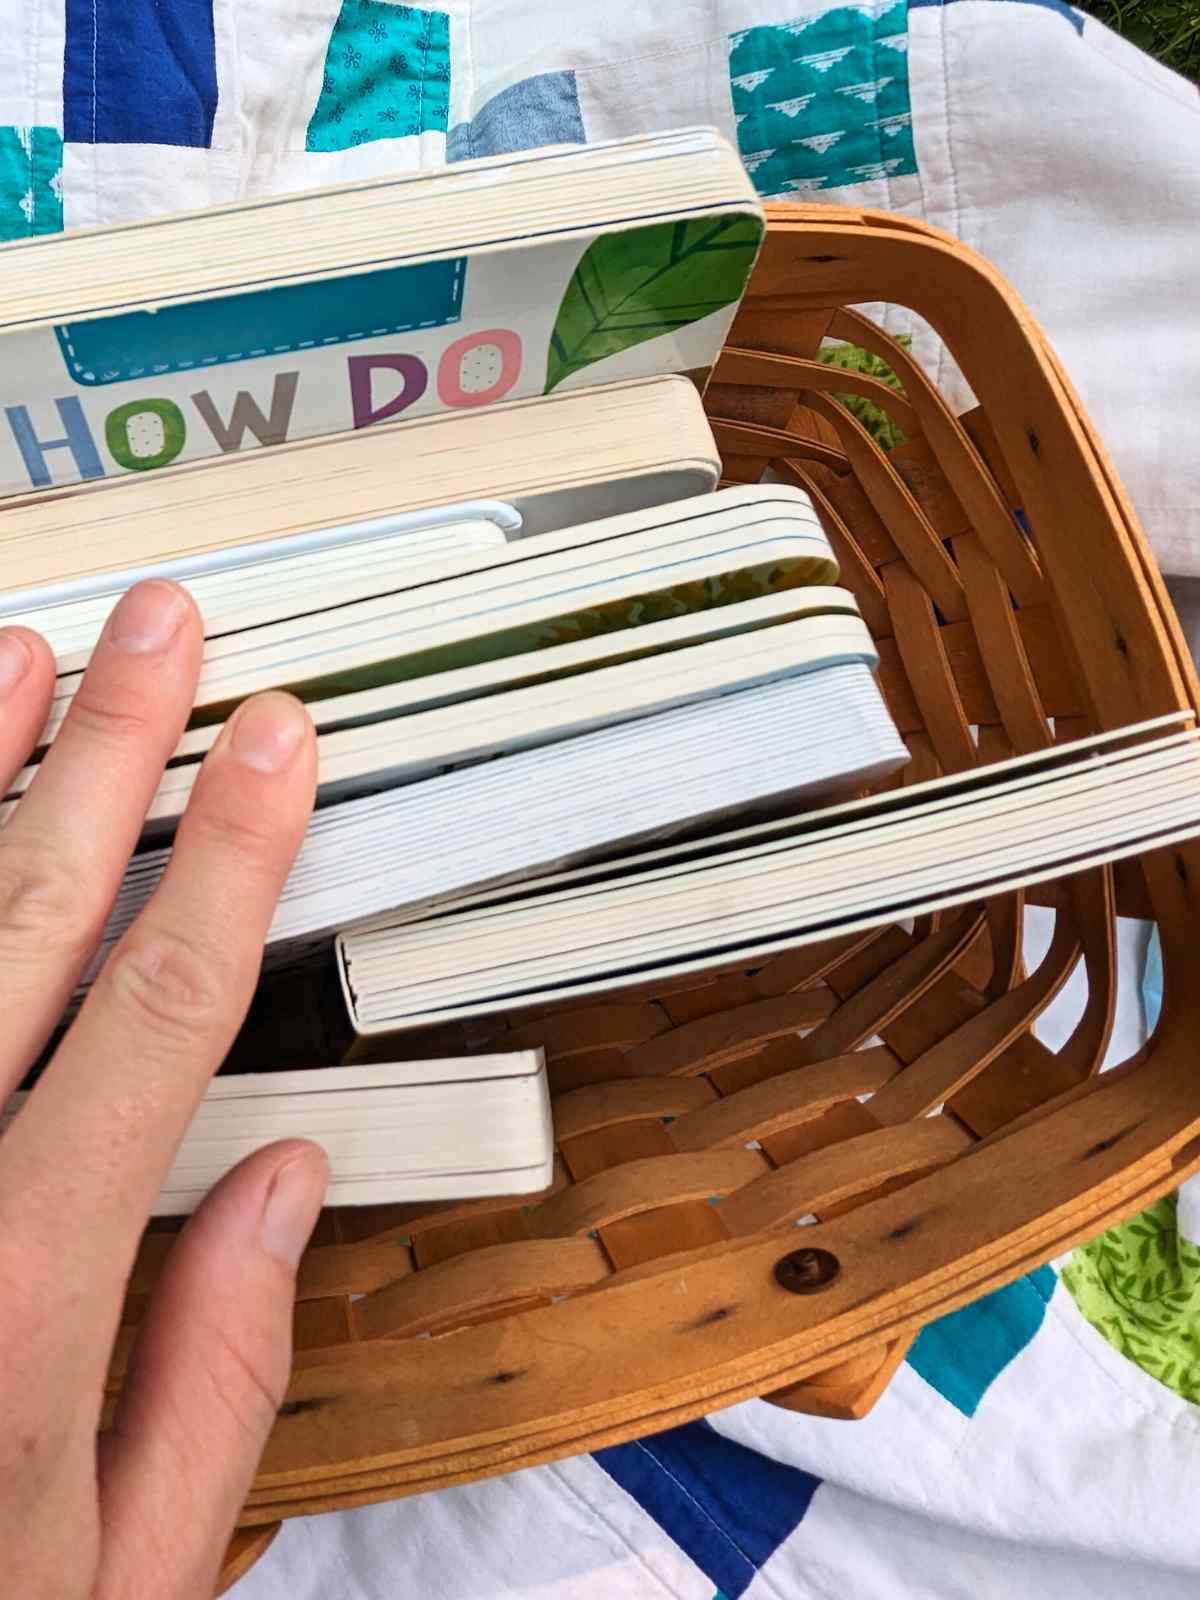 collection of board books in a woven basket on a colorful quilt with a hand on top of them on the left side.